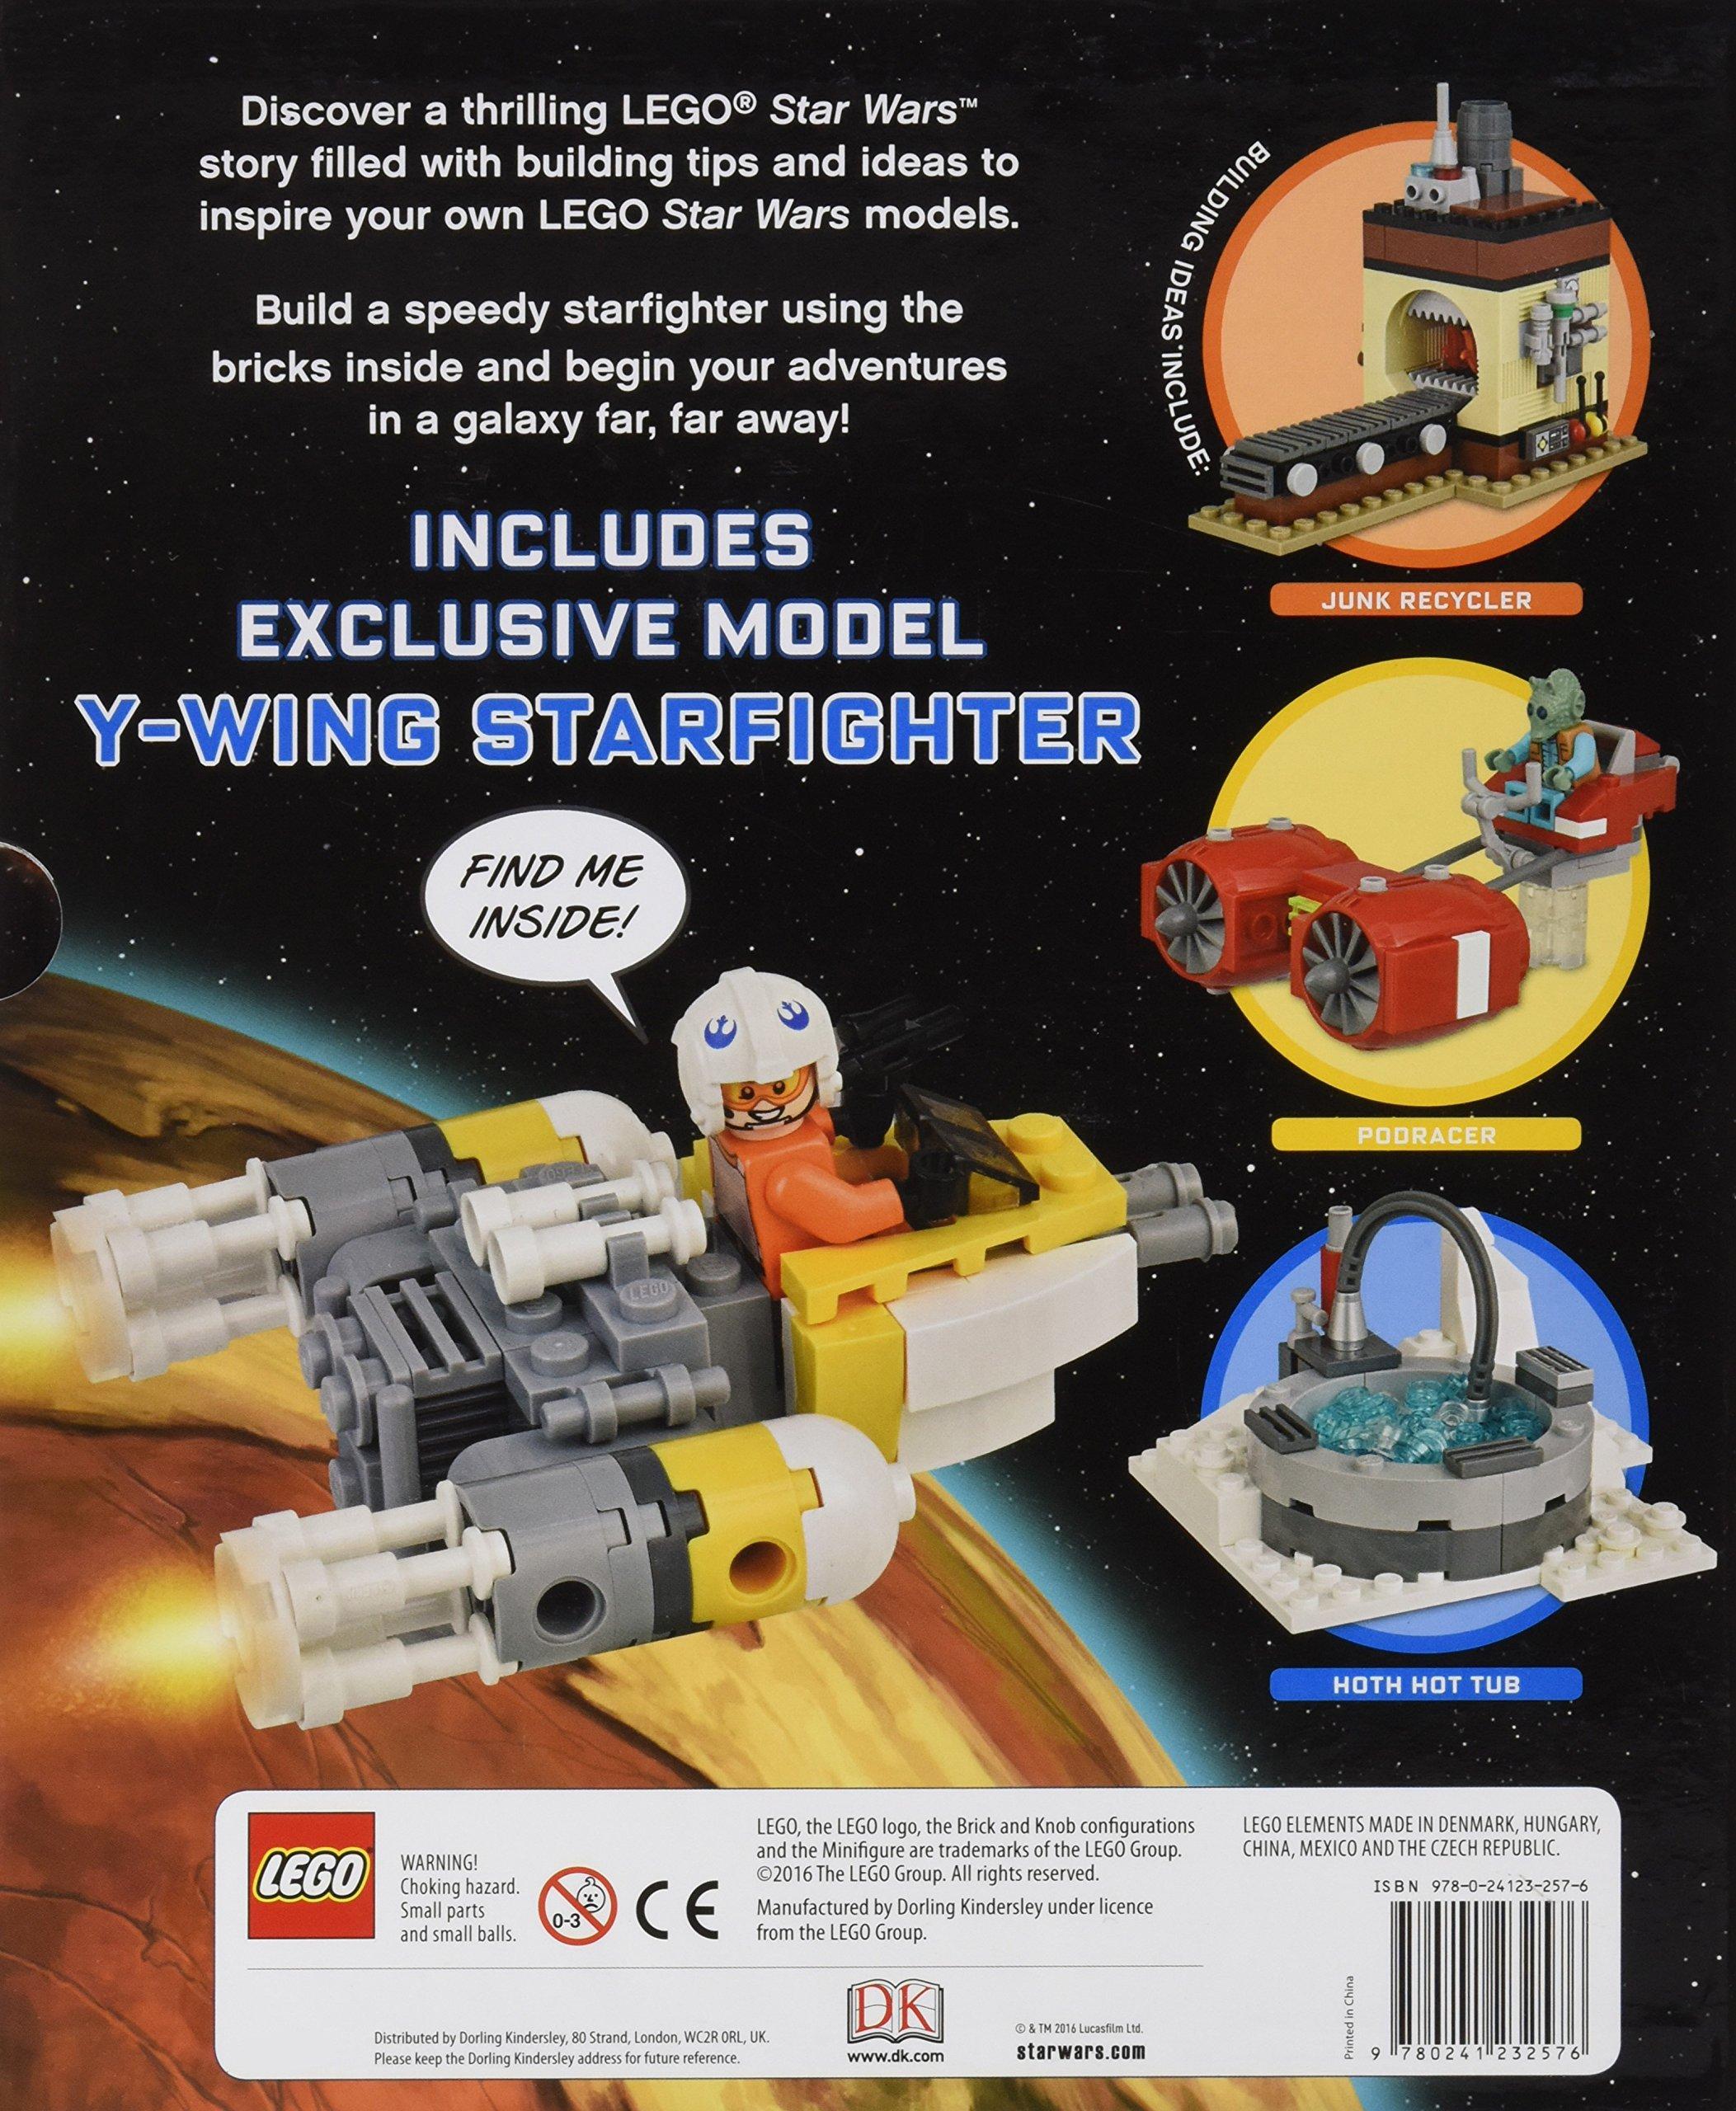 Lego Star Wars: Build Your Own Adventure